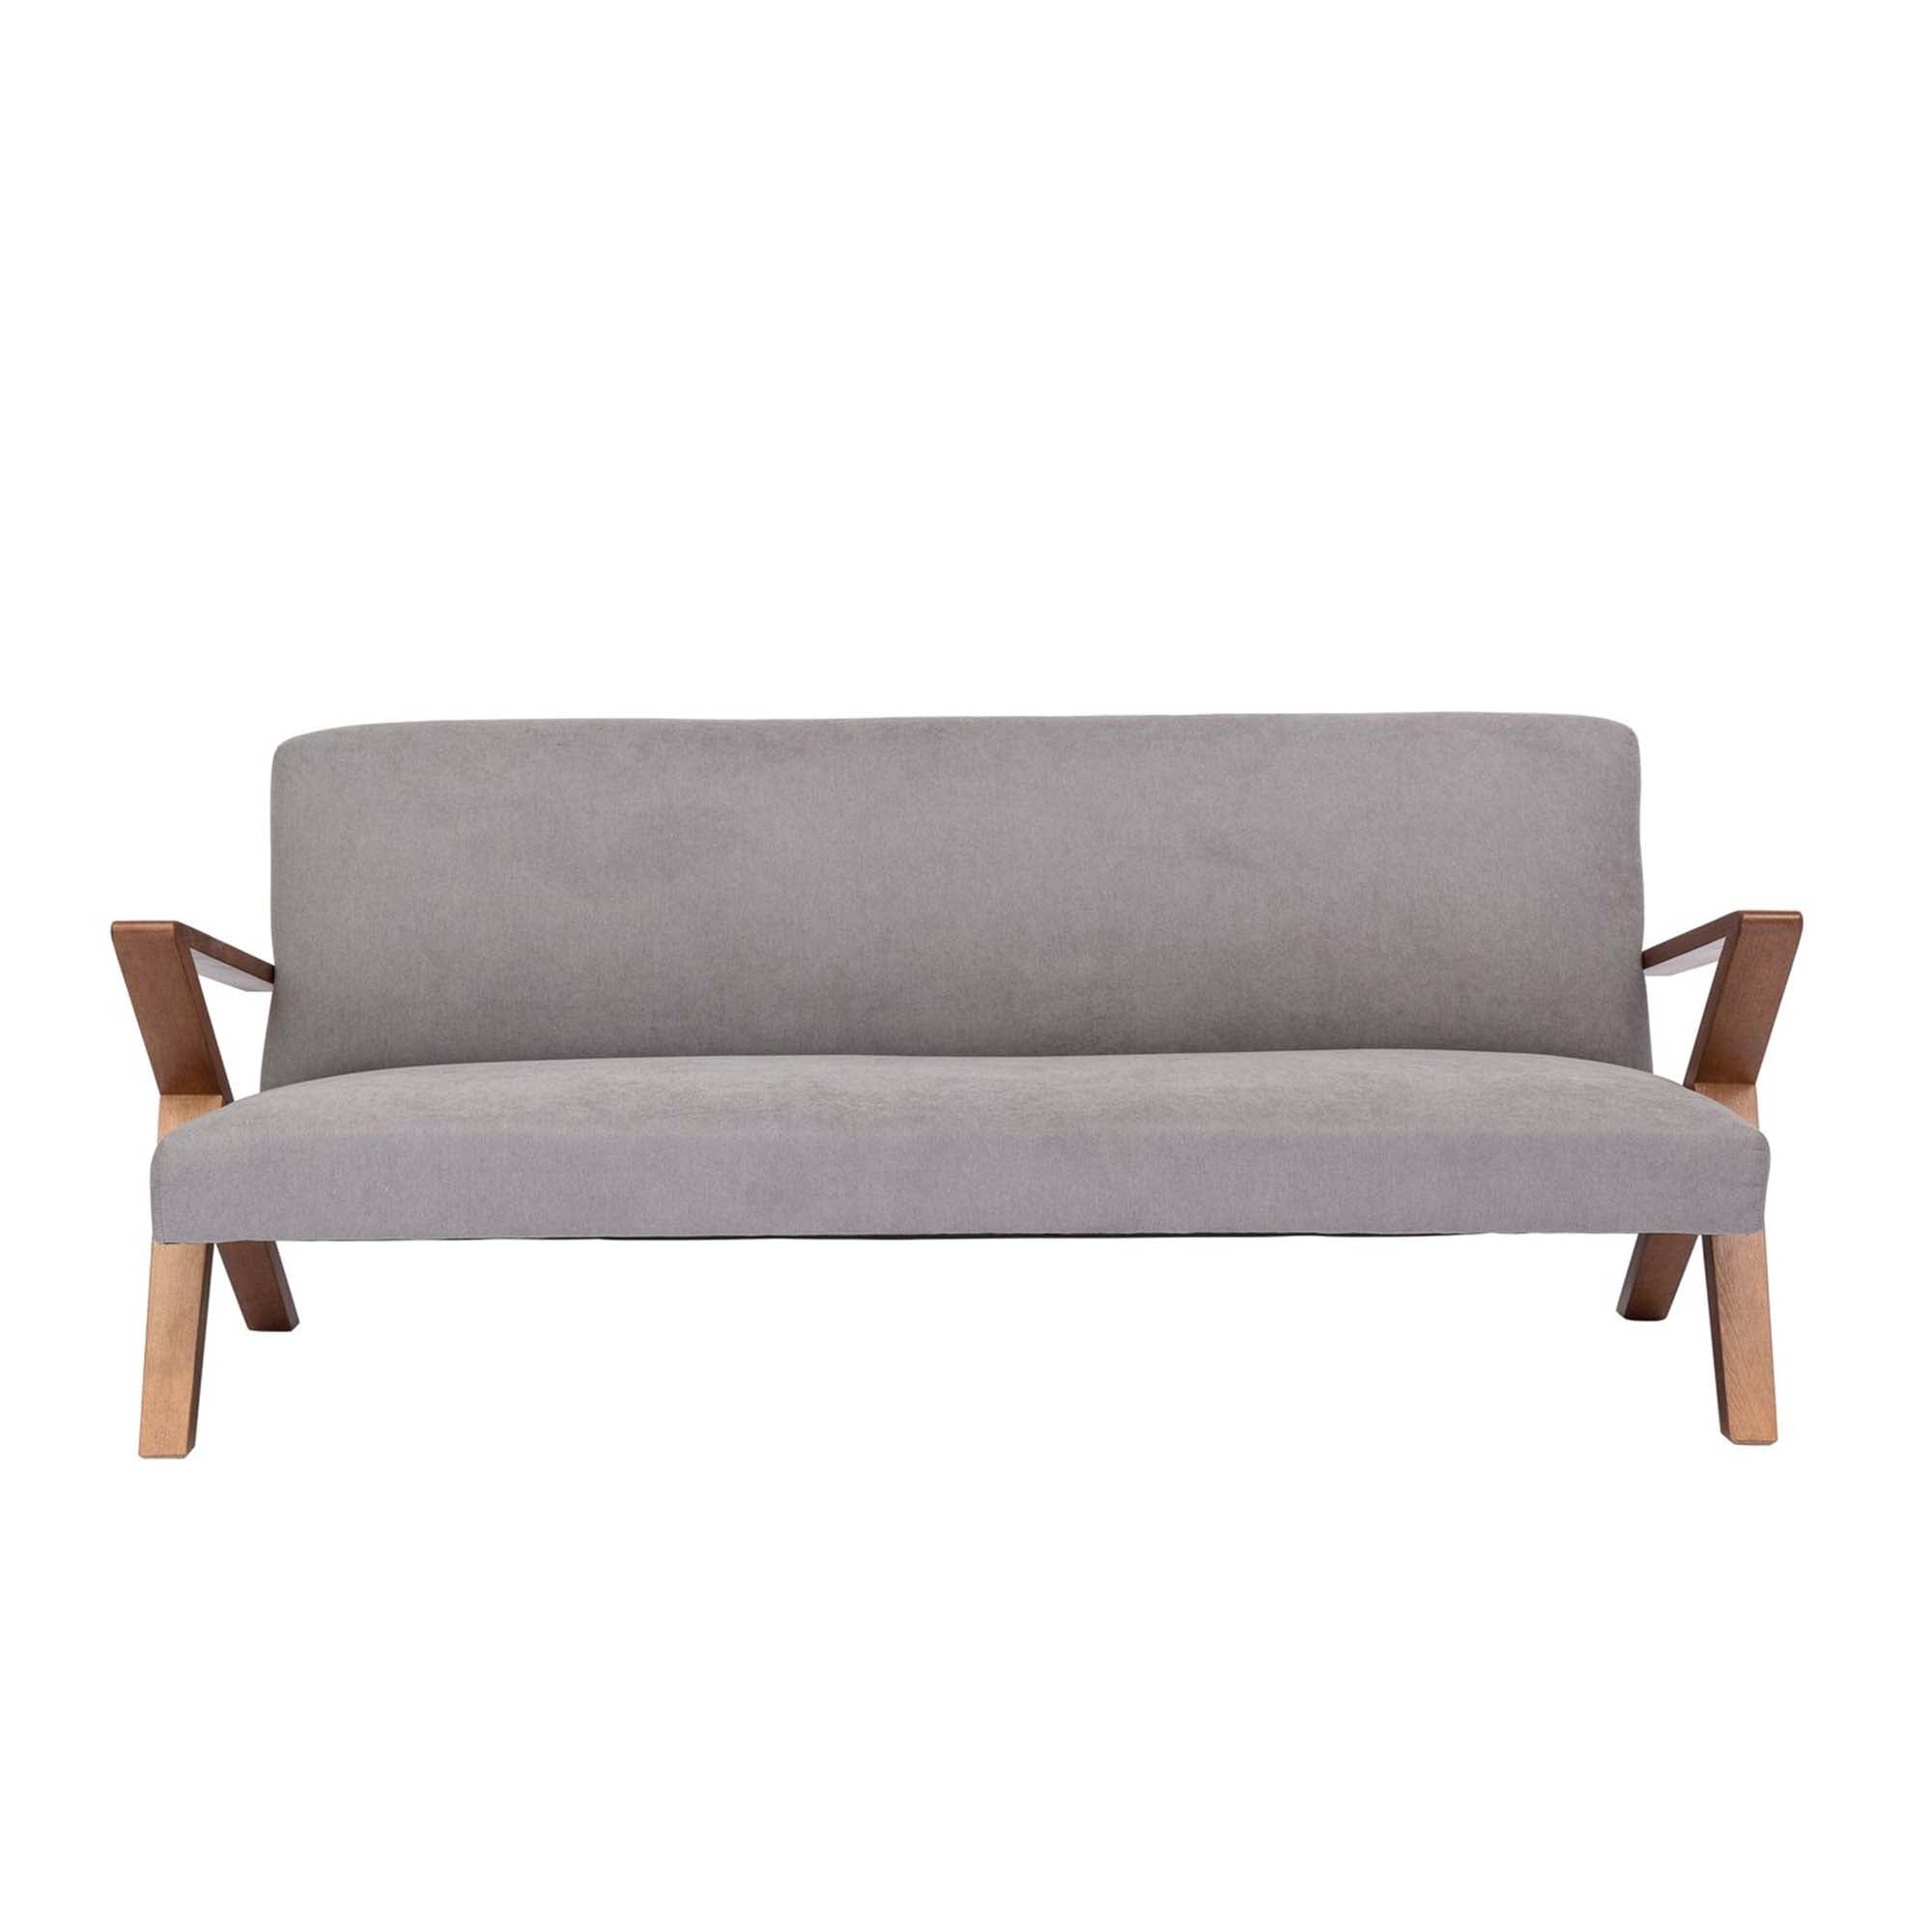  4-seater Sofa Beech Wood Frame, Walnut Colour grey fabric, front view